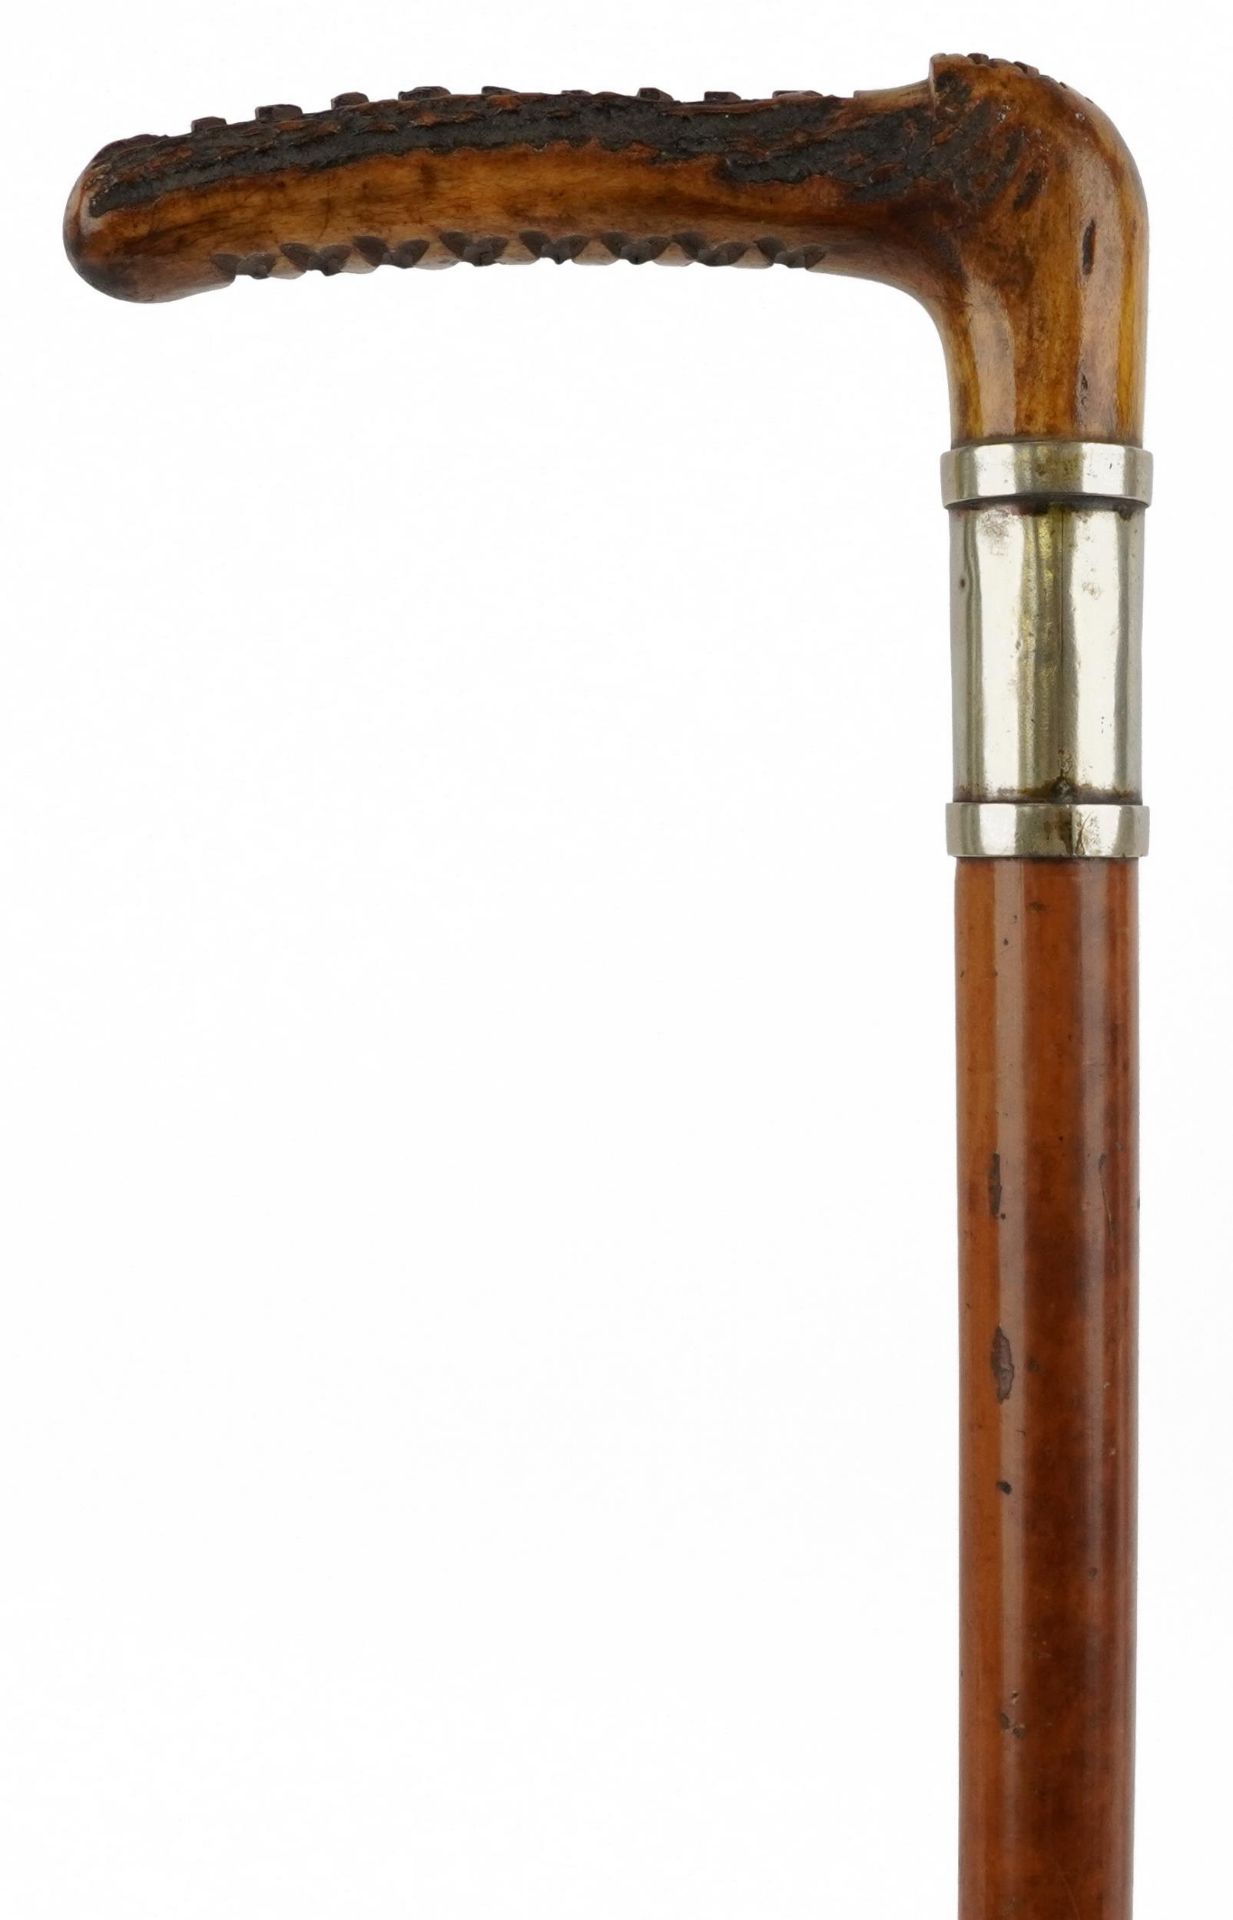 Victorian malacca riding crop with staghorn handle, 57cm in length : For further information on this